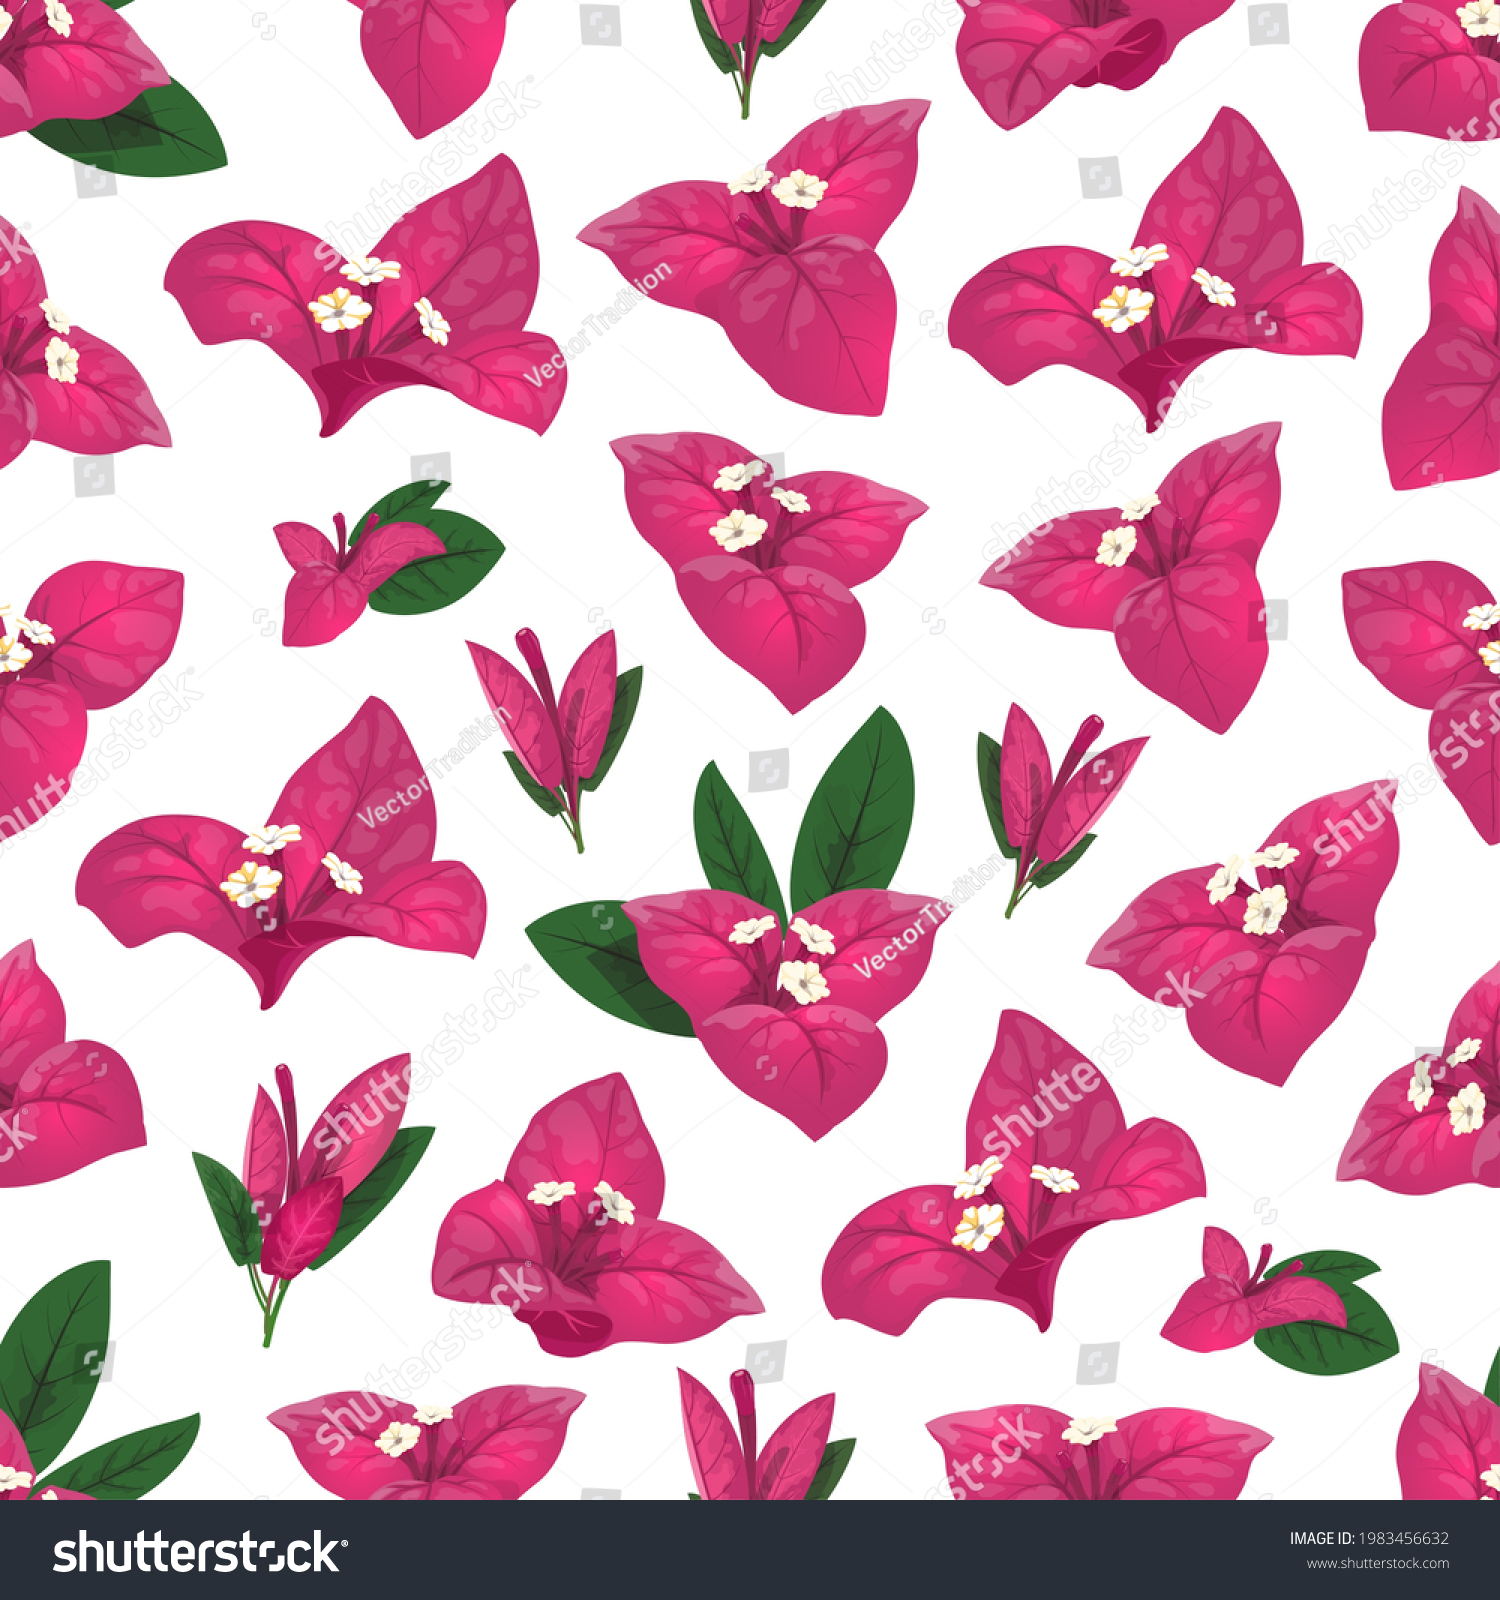 SVG of Bougainvillea seamless pattern of vector white flowers, pink and green leaves. Floral background of blooming bougainvillea branches and vines, blossoms of exotic tropical evergreen plant svg